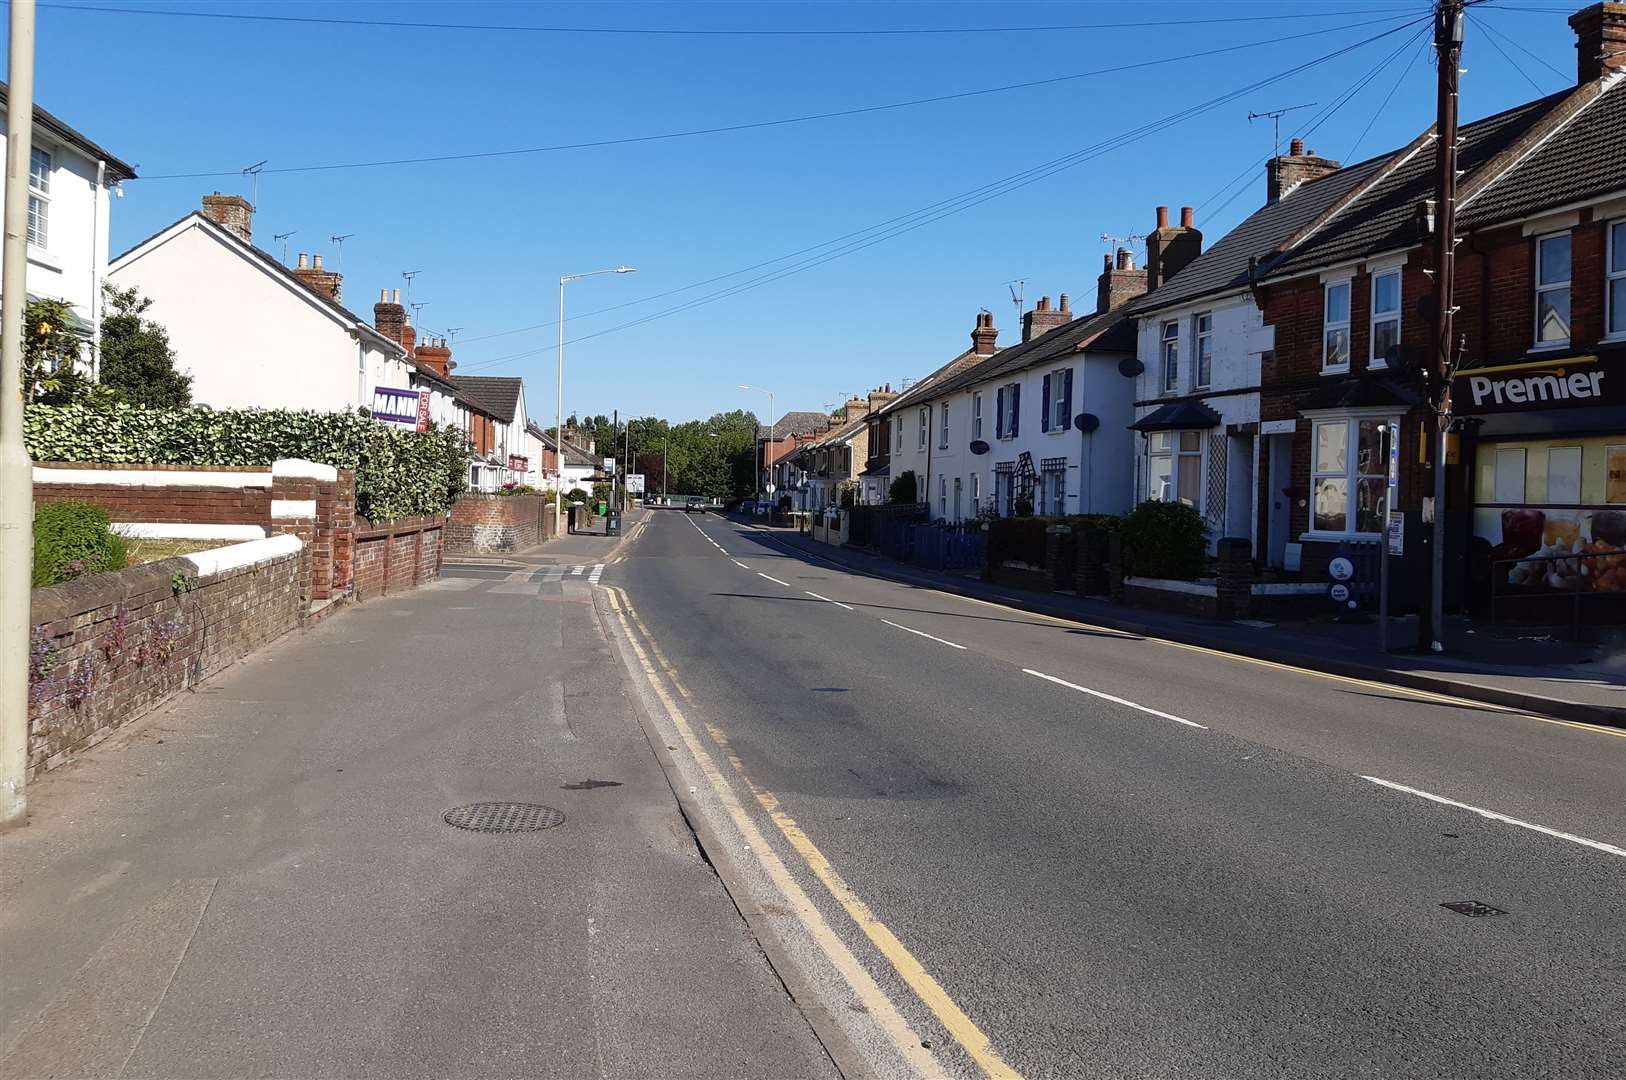 Hythe Road is one of the main roads leading in and out of the town centre